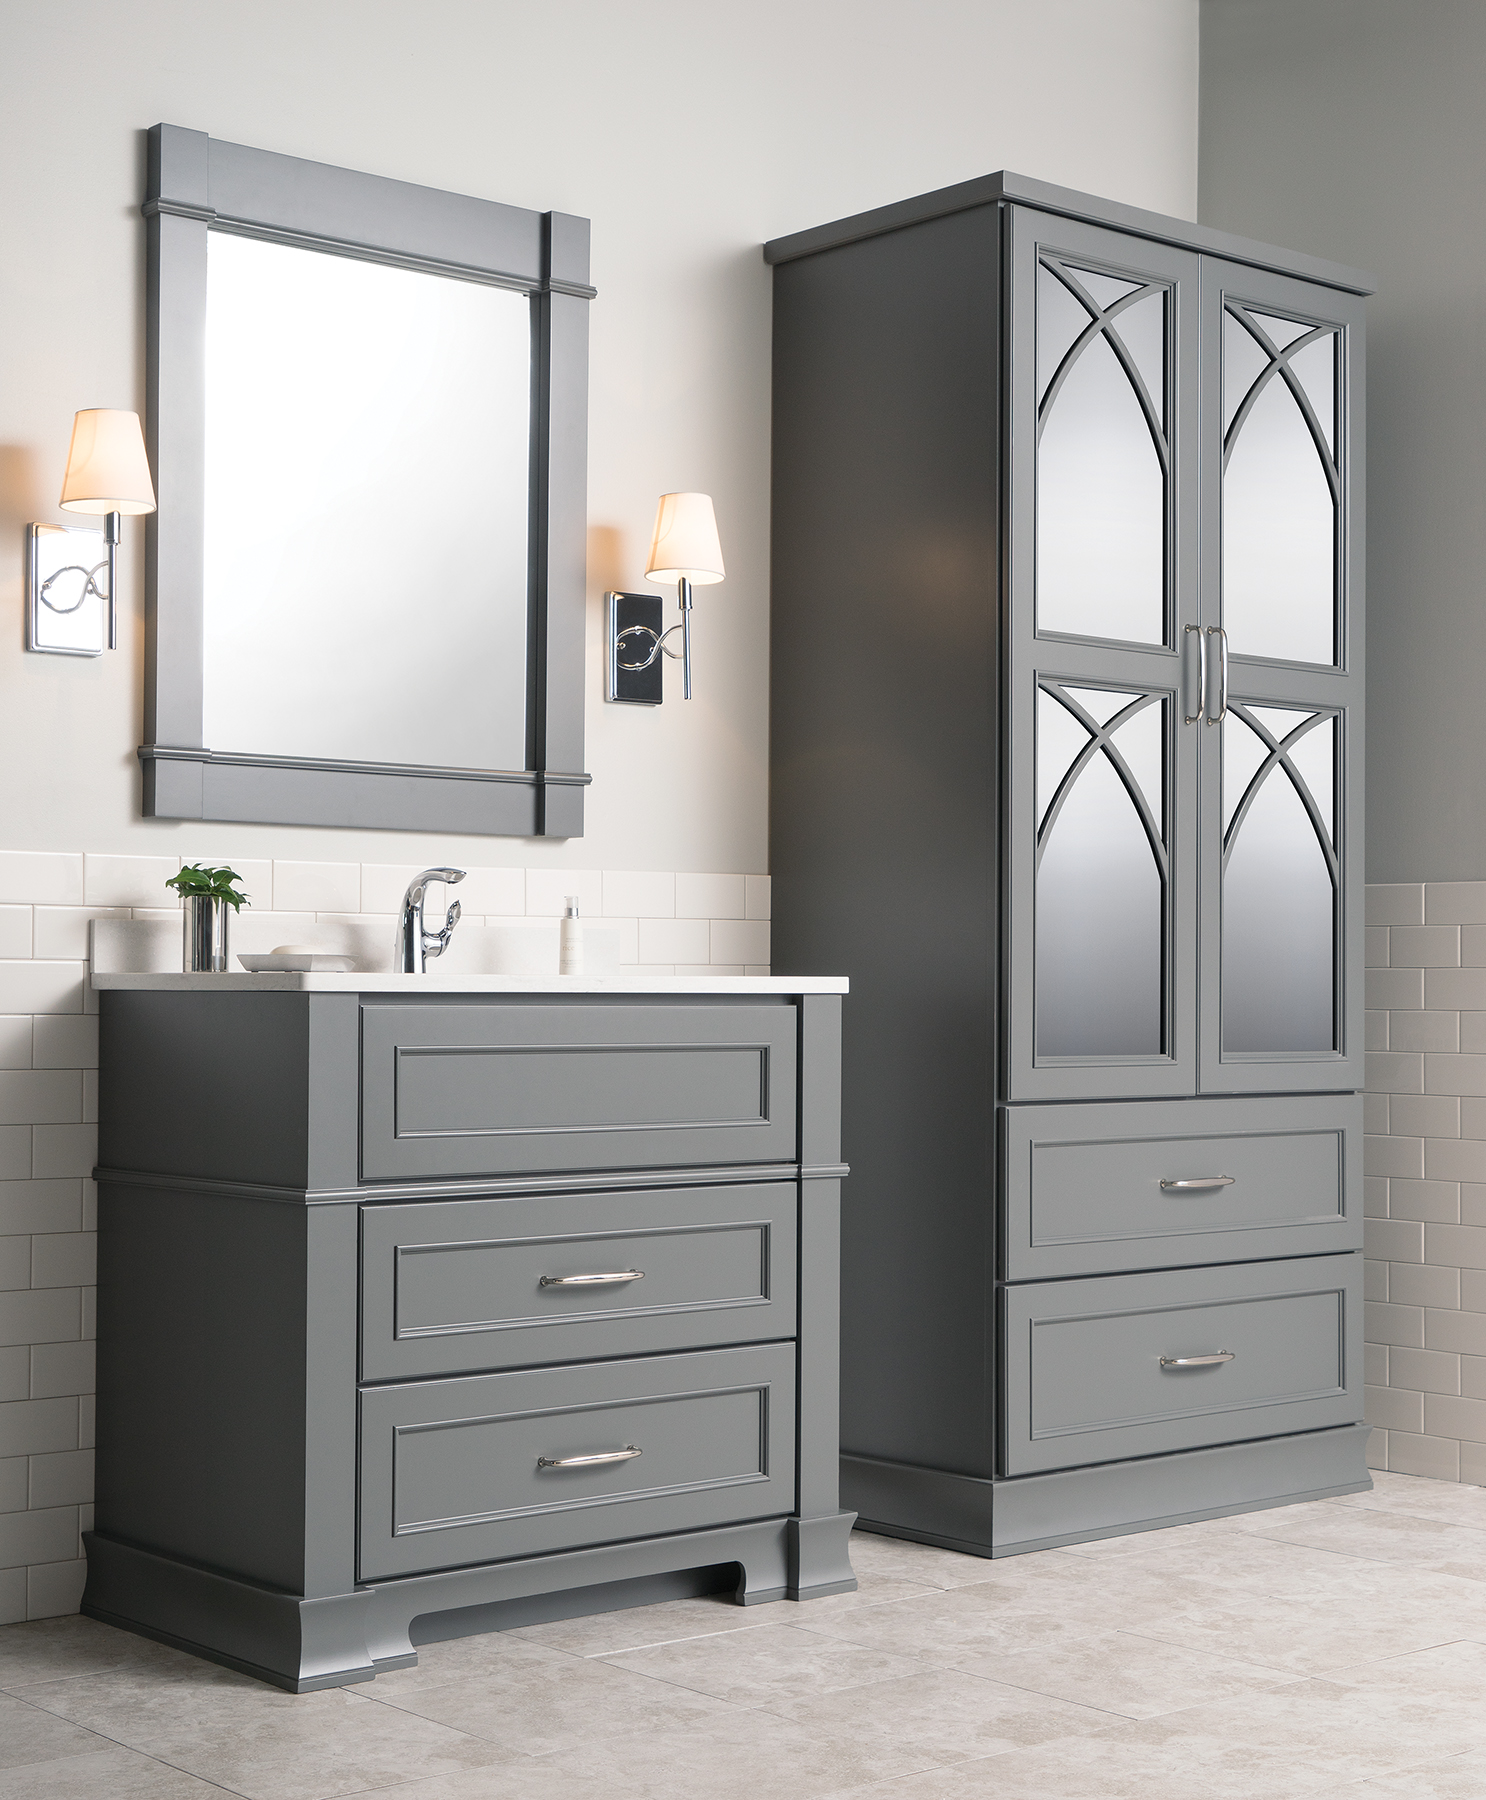 Dark gray bathroom furniture set with a vanity and a free-standing linen cabinet with decorative mirror cabinet doors.